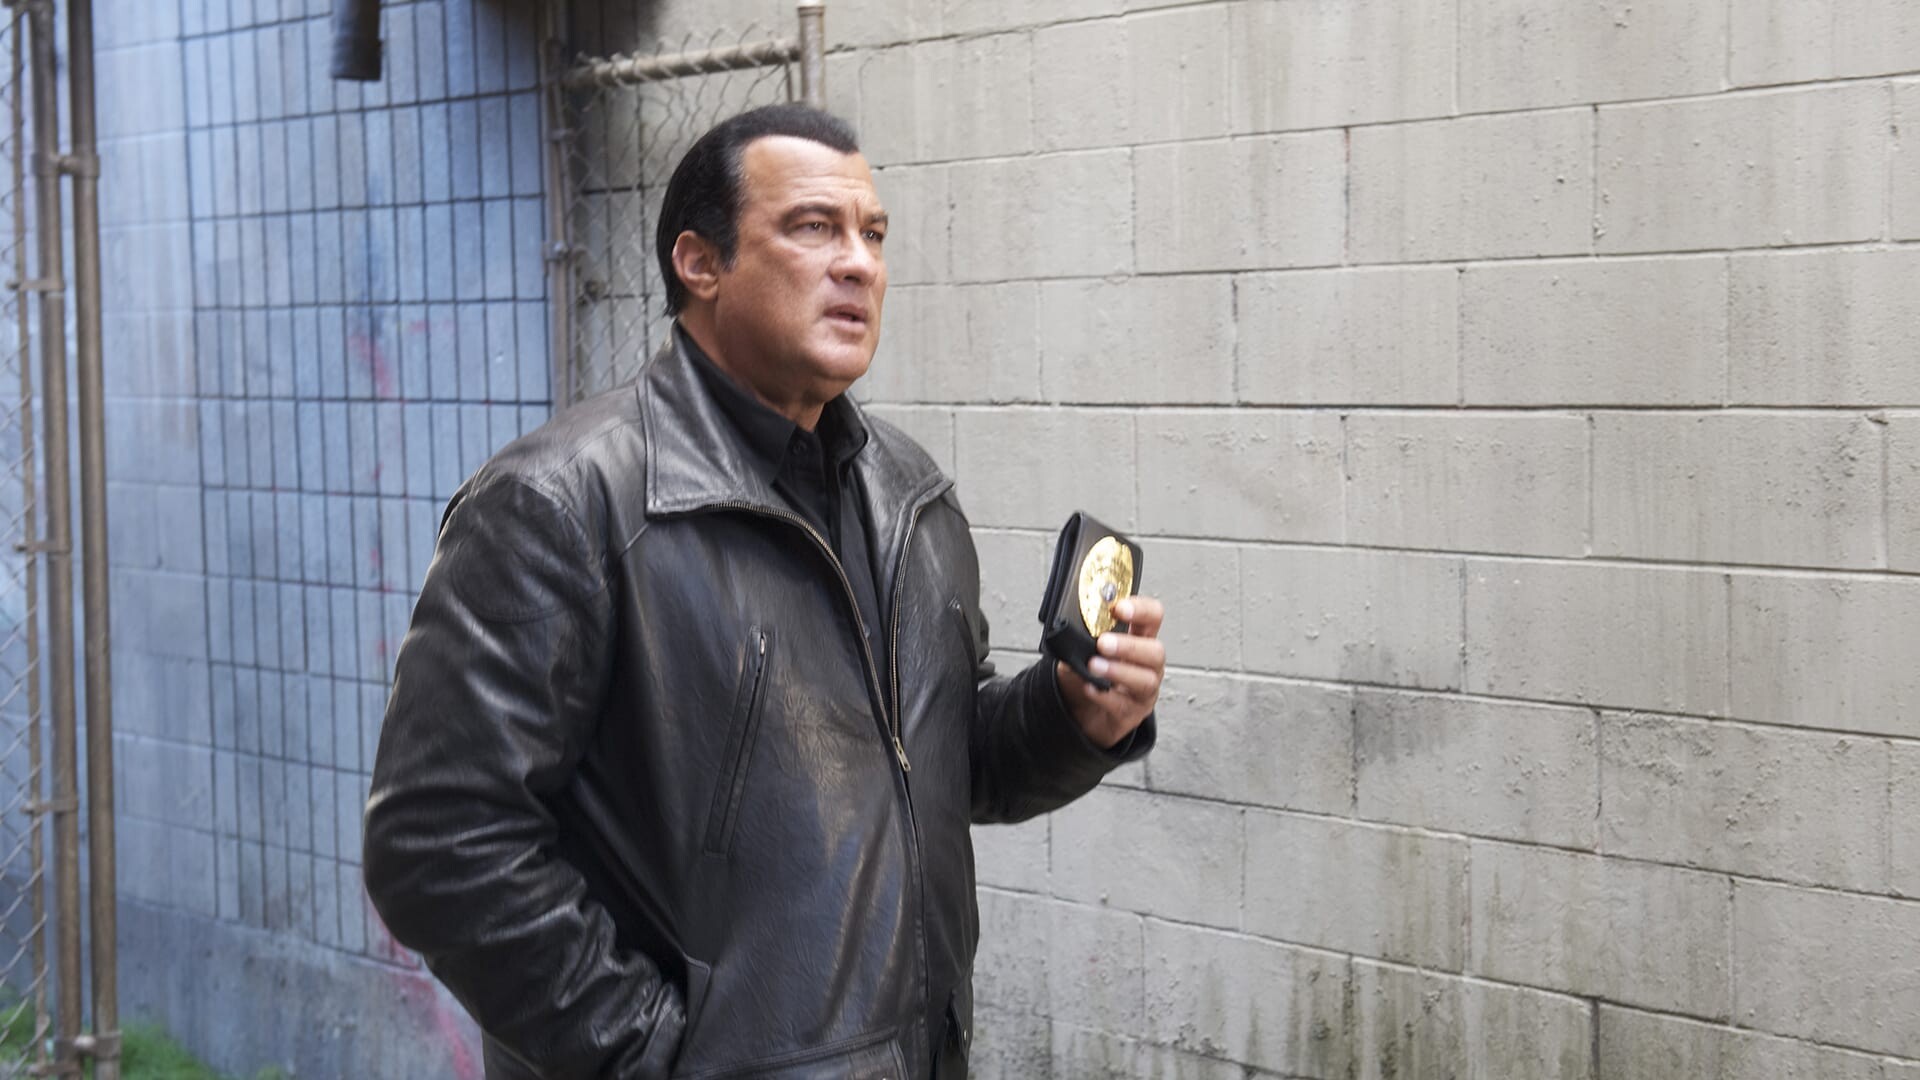 Steven Seagal: Street Wars, 2011, Elijah Kane, The head of a crack undercover police unit, Battling with internal corruption. 1920x1080 Full HD Background.